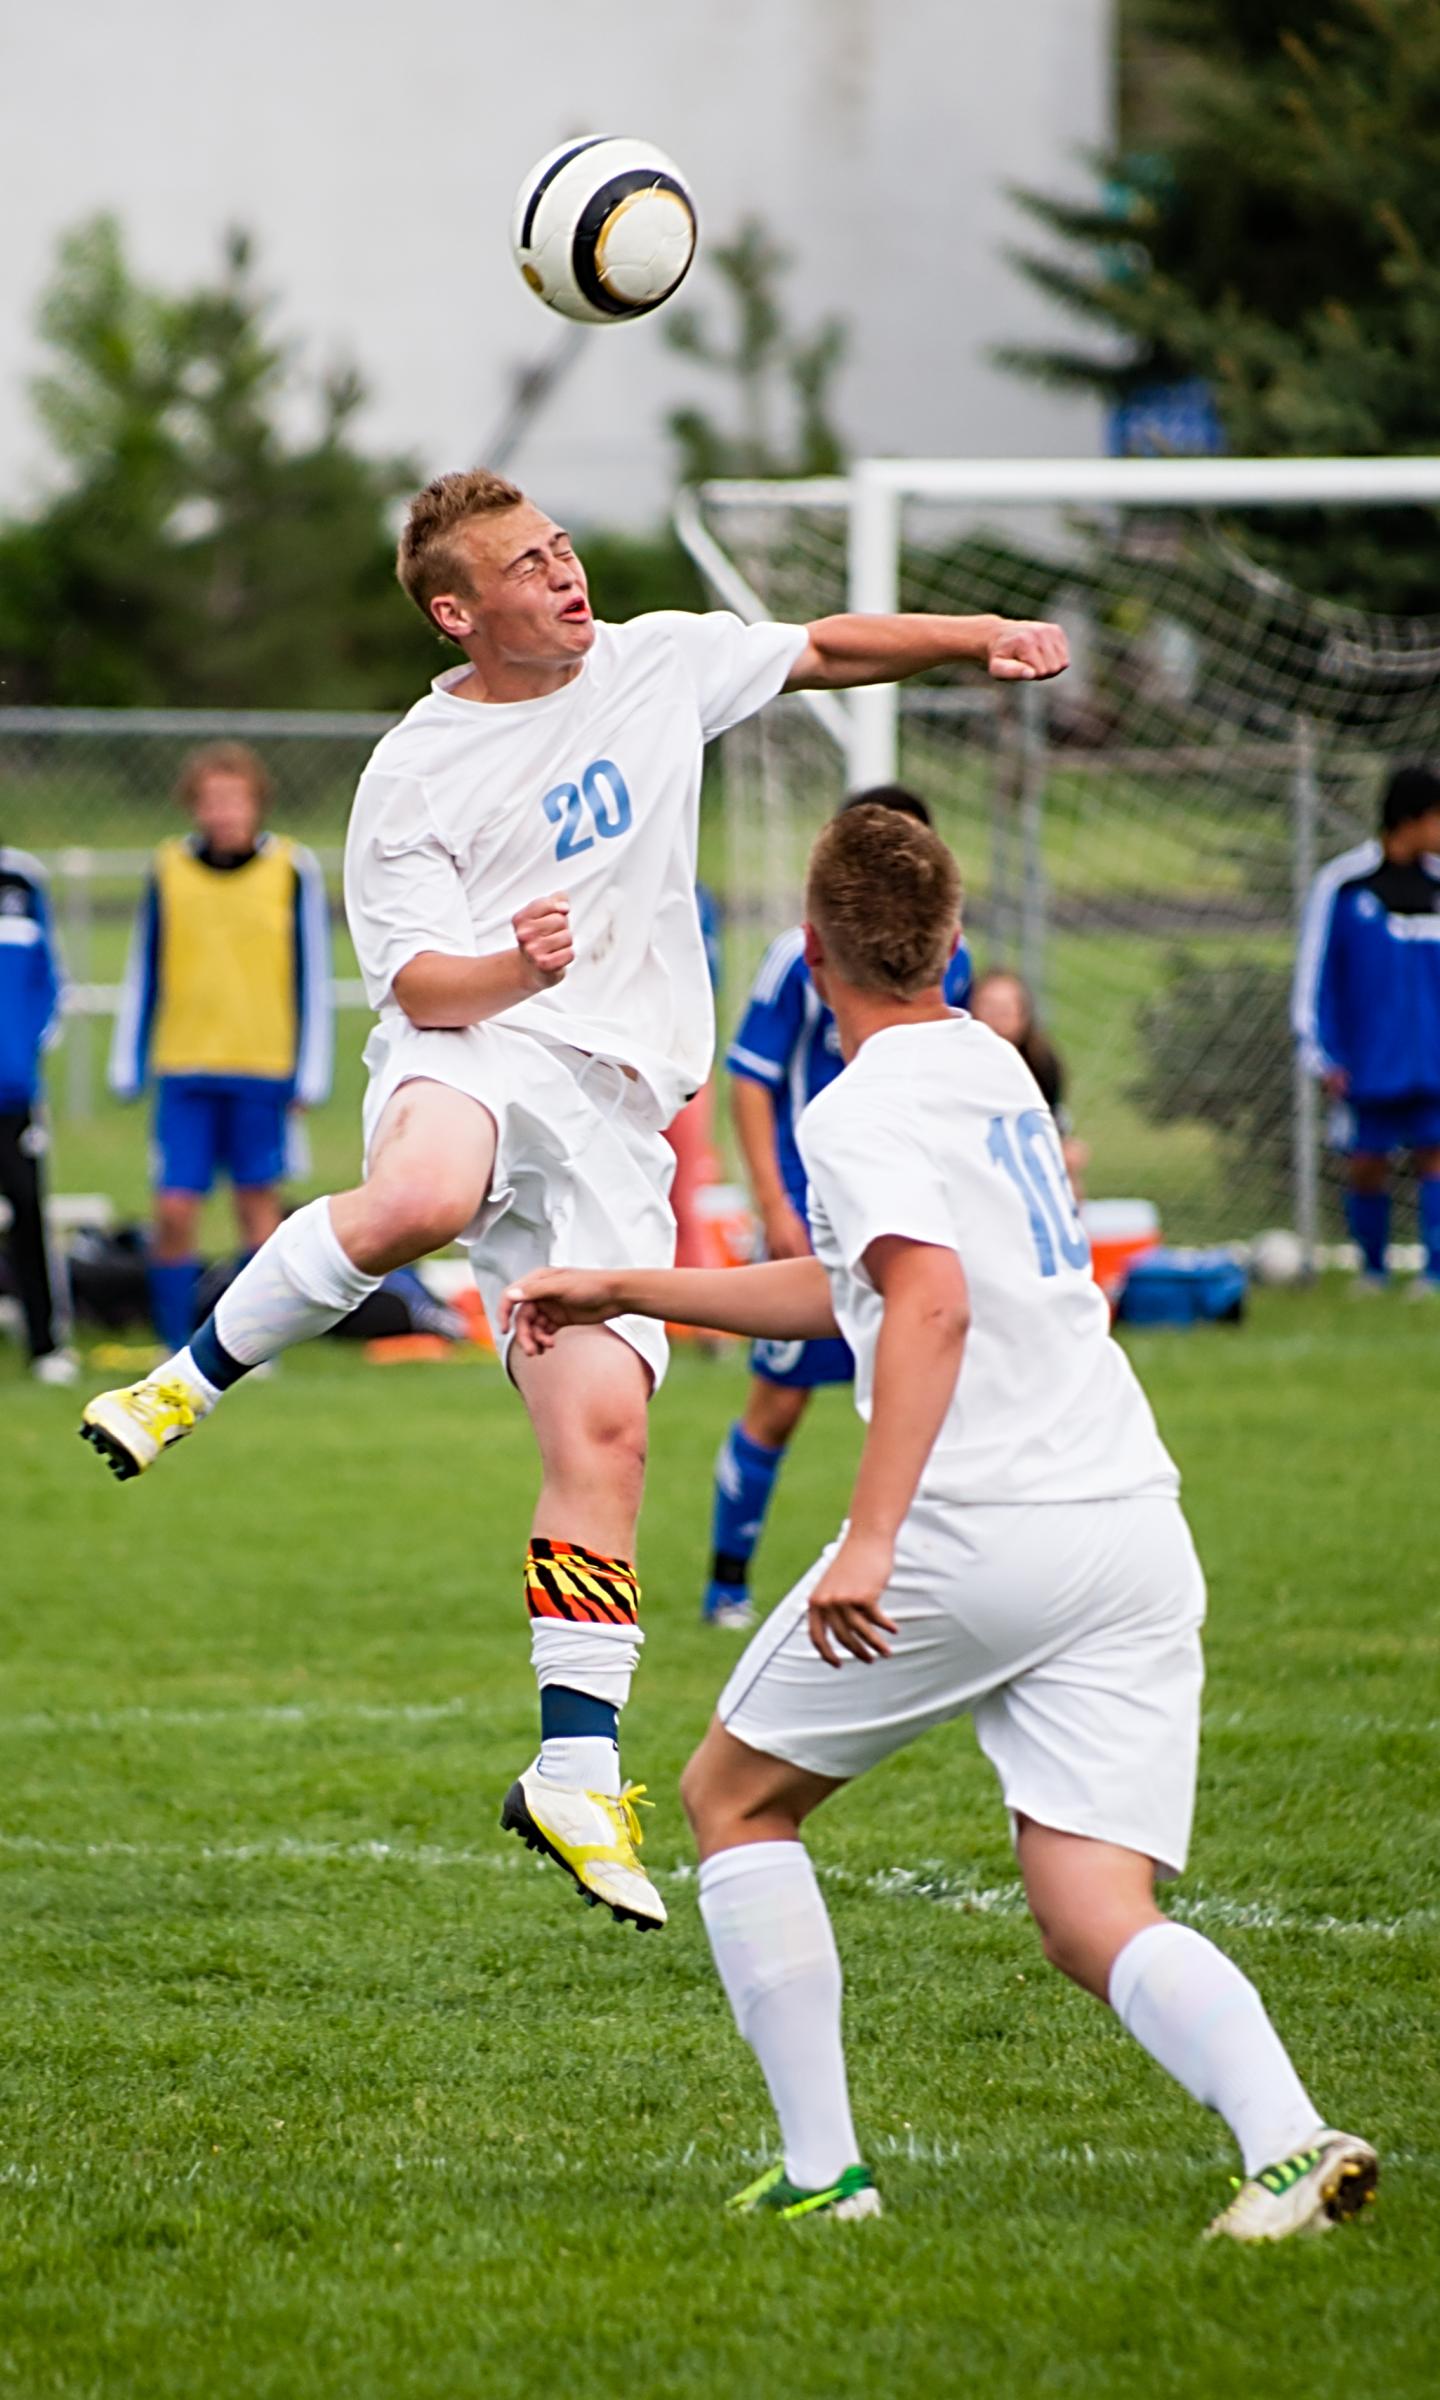 High school soccer player heading a ball during a game